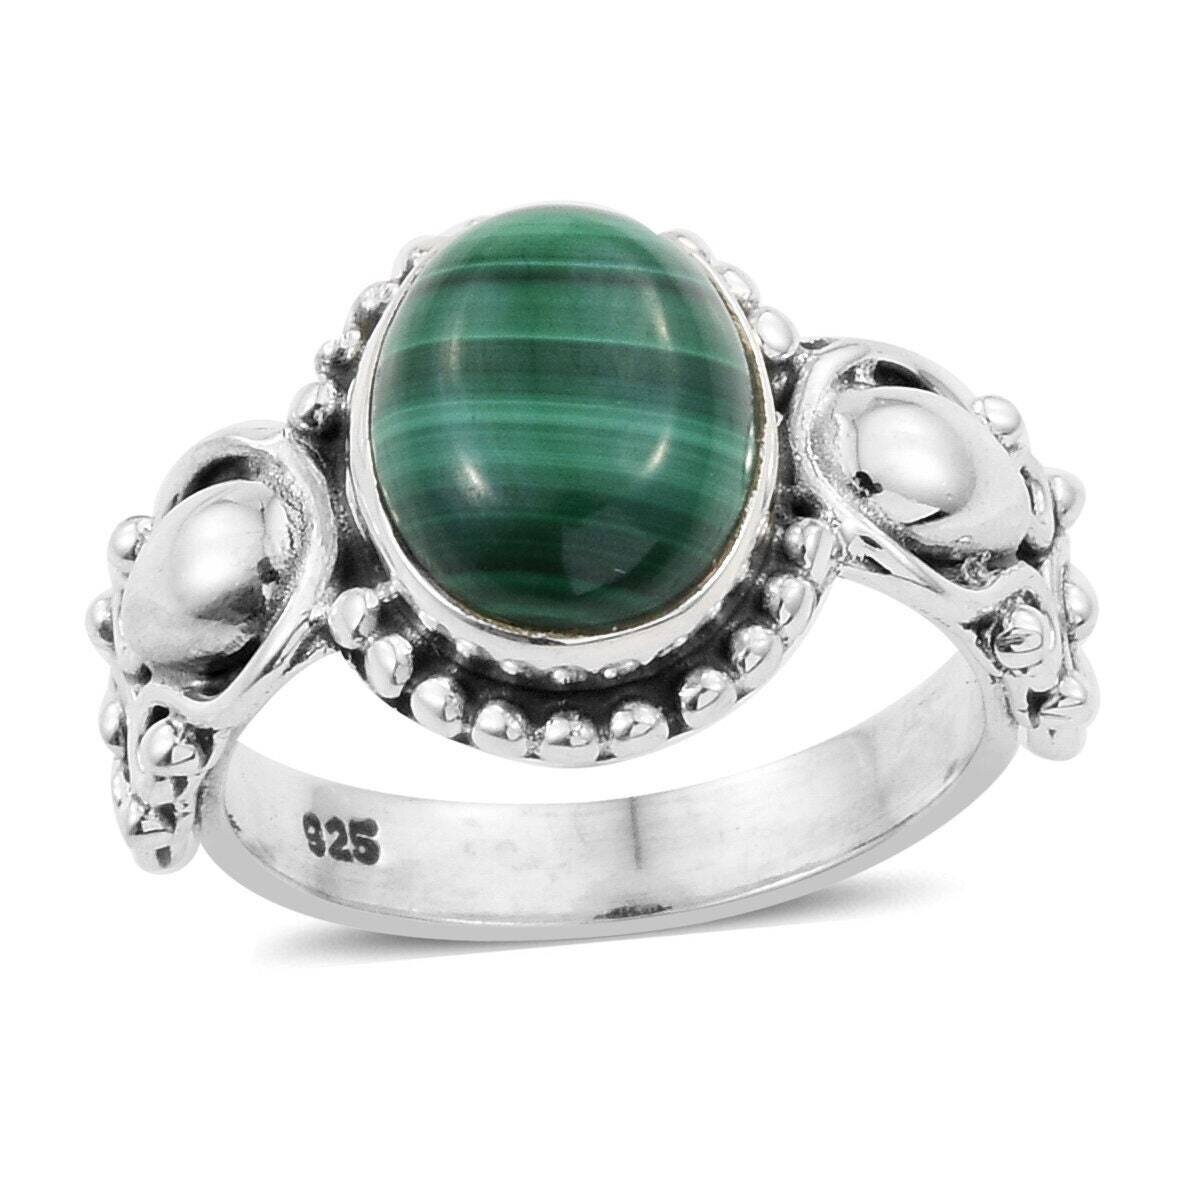 Malachite AAA+Quality Gemstone Ring Oval Stone Boho Ring 925-Sterling Solid Silver Ring,Middle Finger Ring Etsy Cyber Valentine's Day Gift